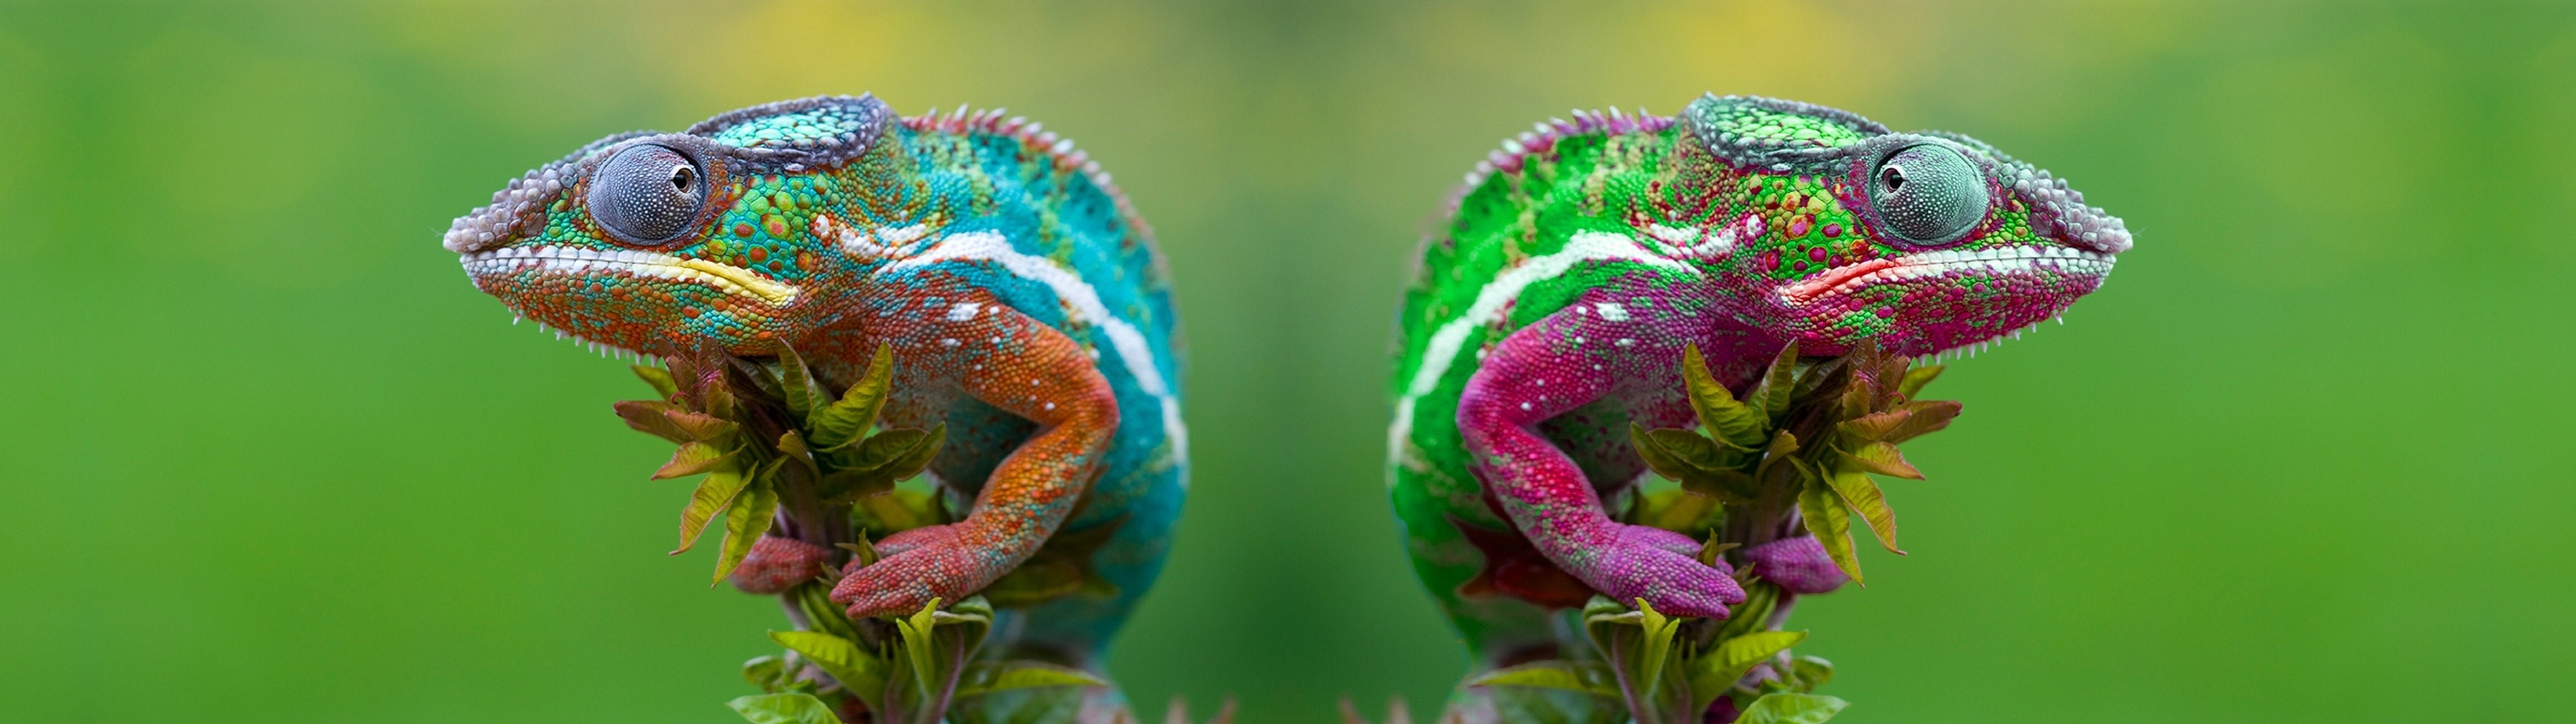 General 3840x1080 chameleons animals nature colorful green background camouflage